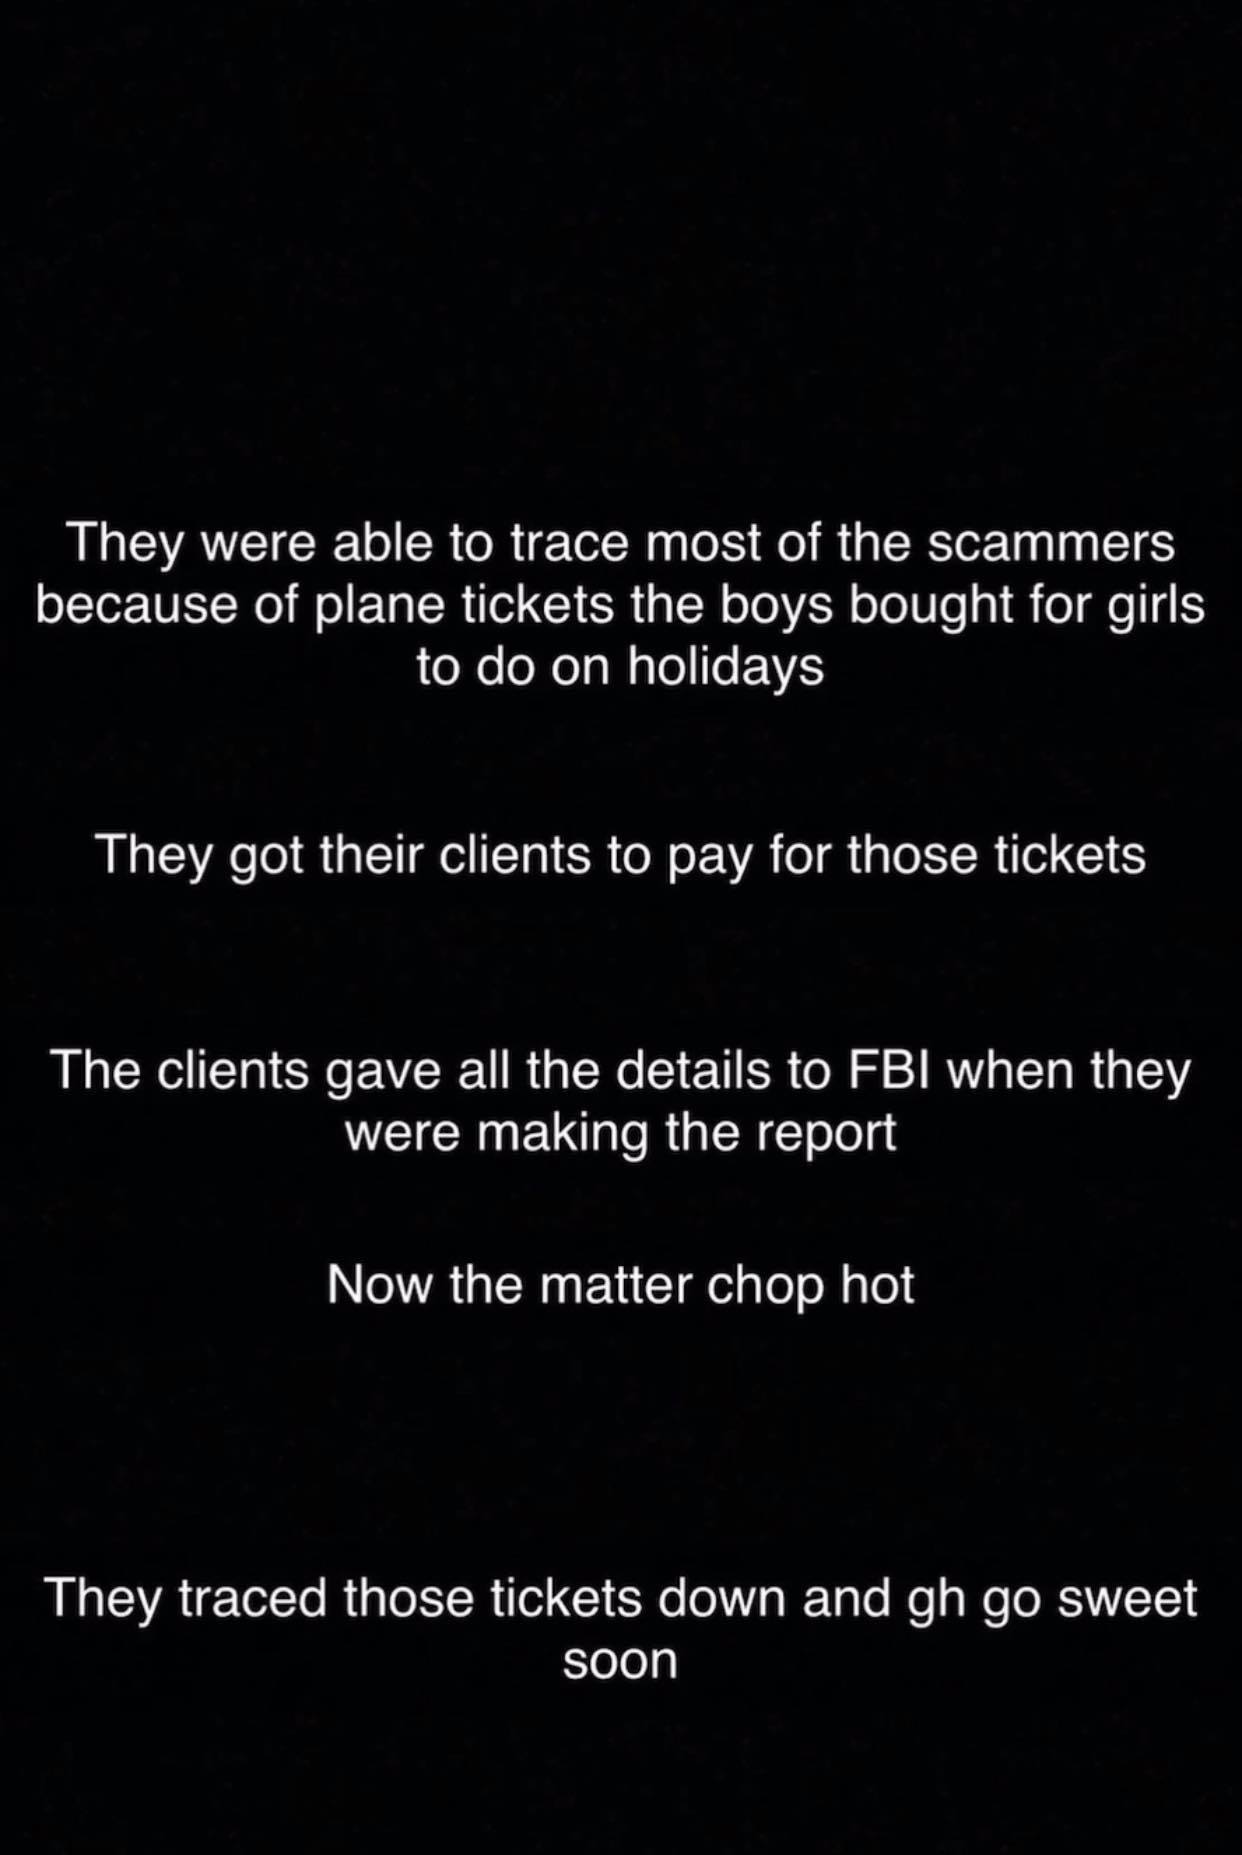 Scammers traced by FBI